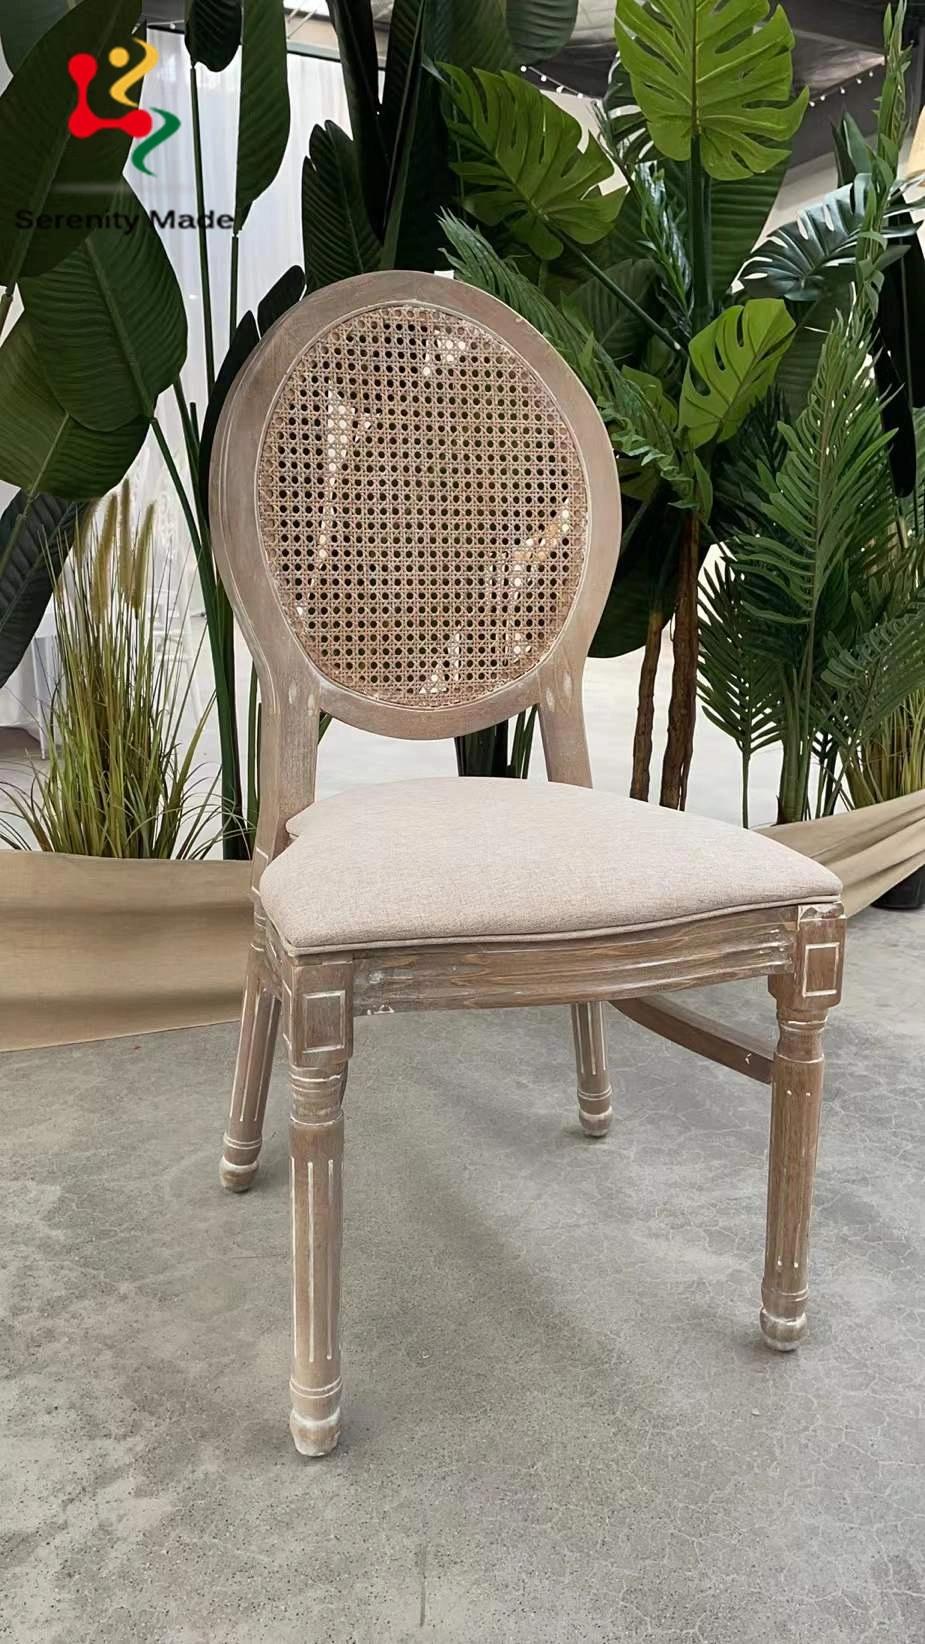 Event Hire Commerical Use Rustic Oak Wood Wedding Use Upholstered Seat with Rattan Backrest Dining Chair